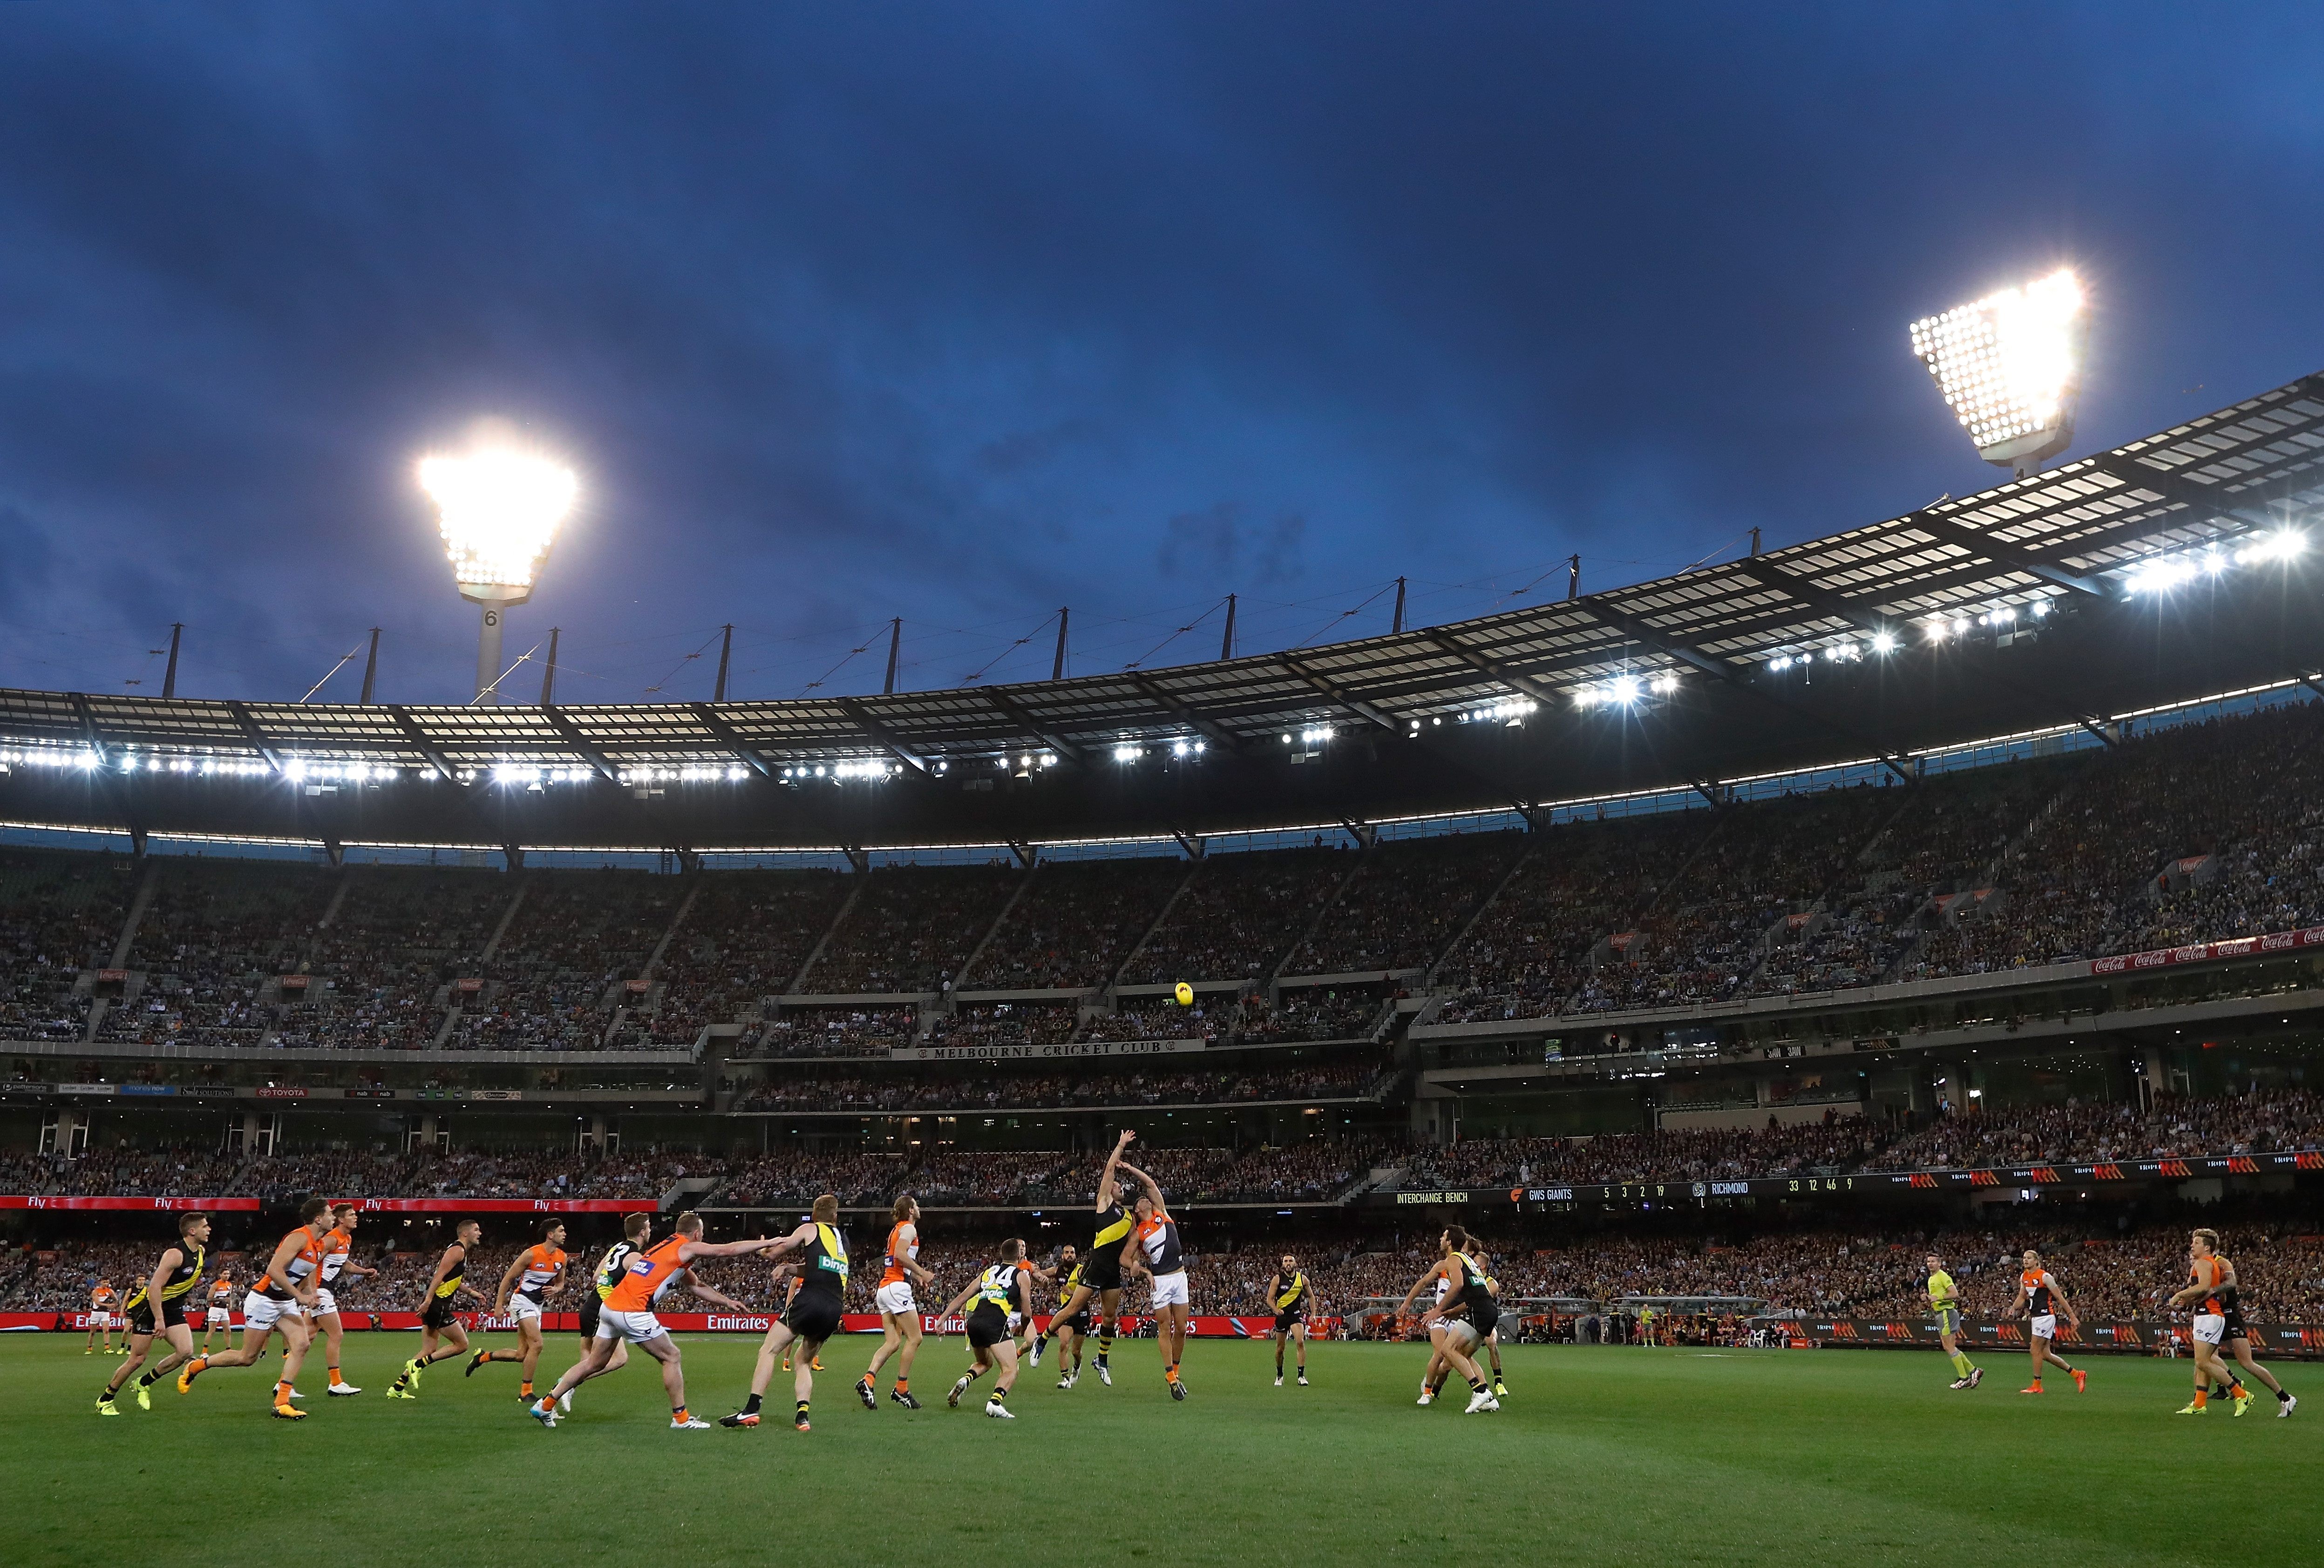 Melbourne Cricket Club Wants Fans To Share Their Solar Electricity